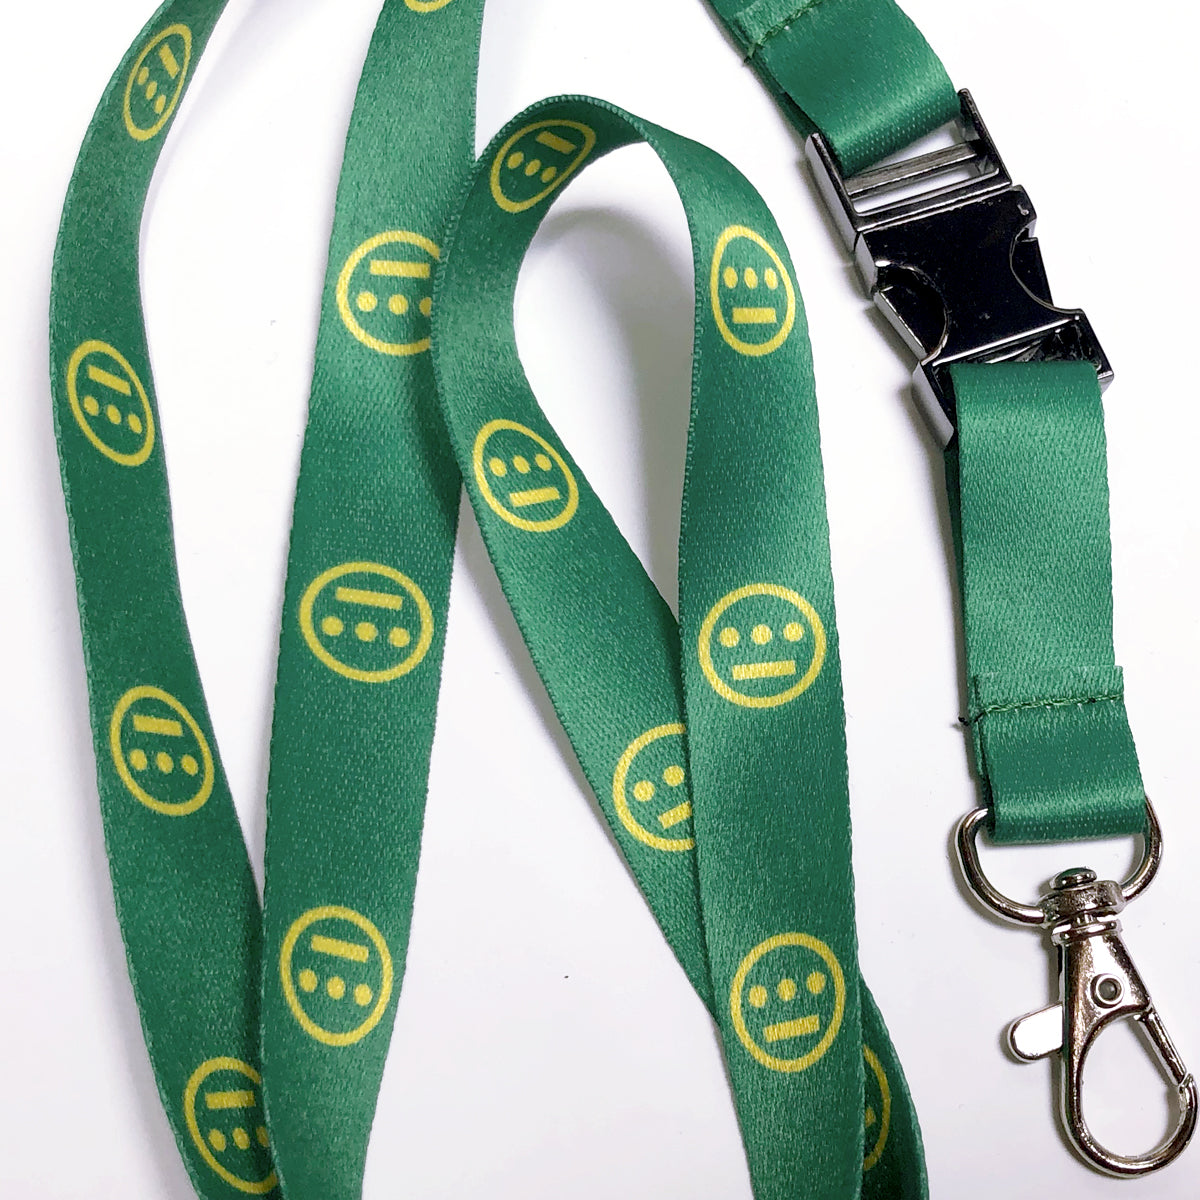 Detailed close-up of green quick release lanyard with yellow Hieroglyphics logo on repeat. 